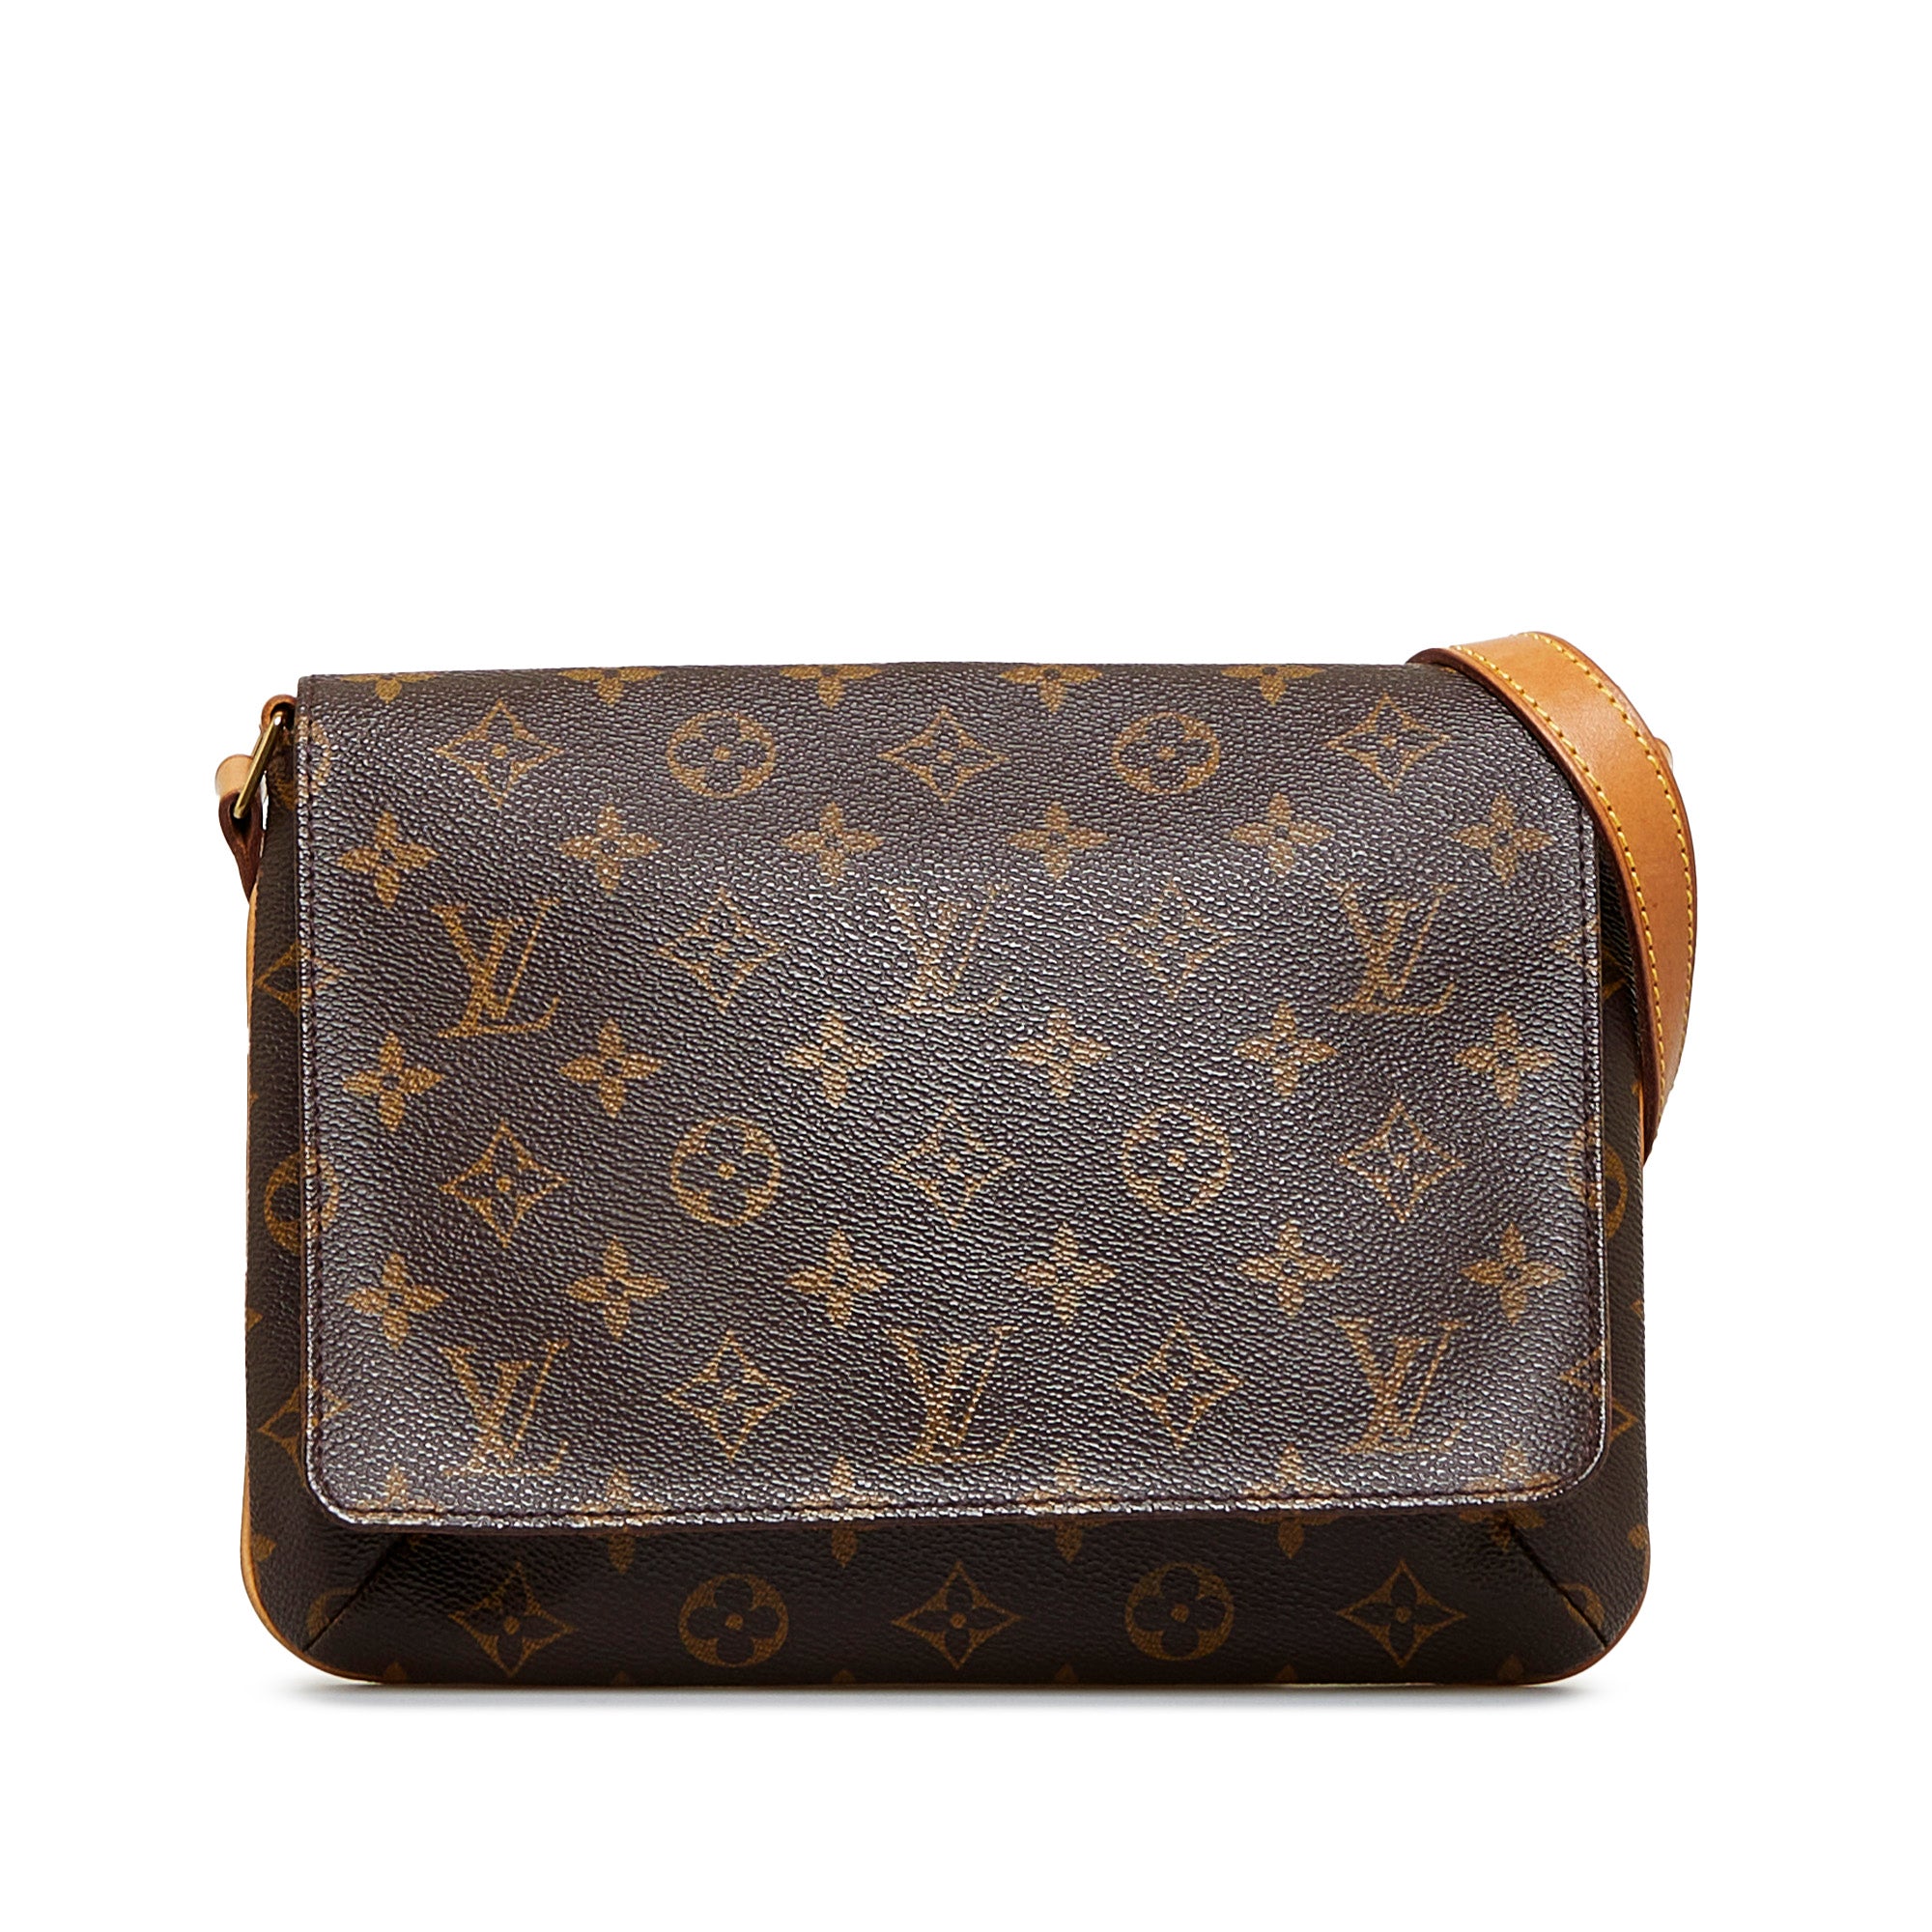 LOUIS VUITTON. Musette bag in monogram canvas and leathe…